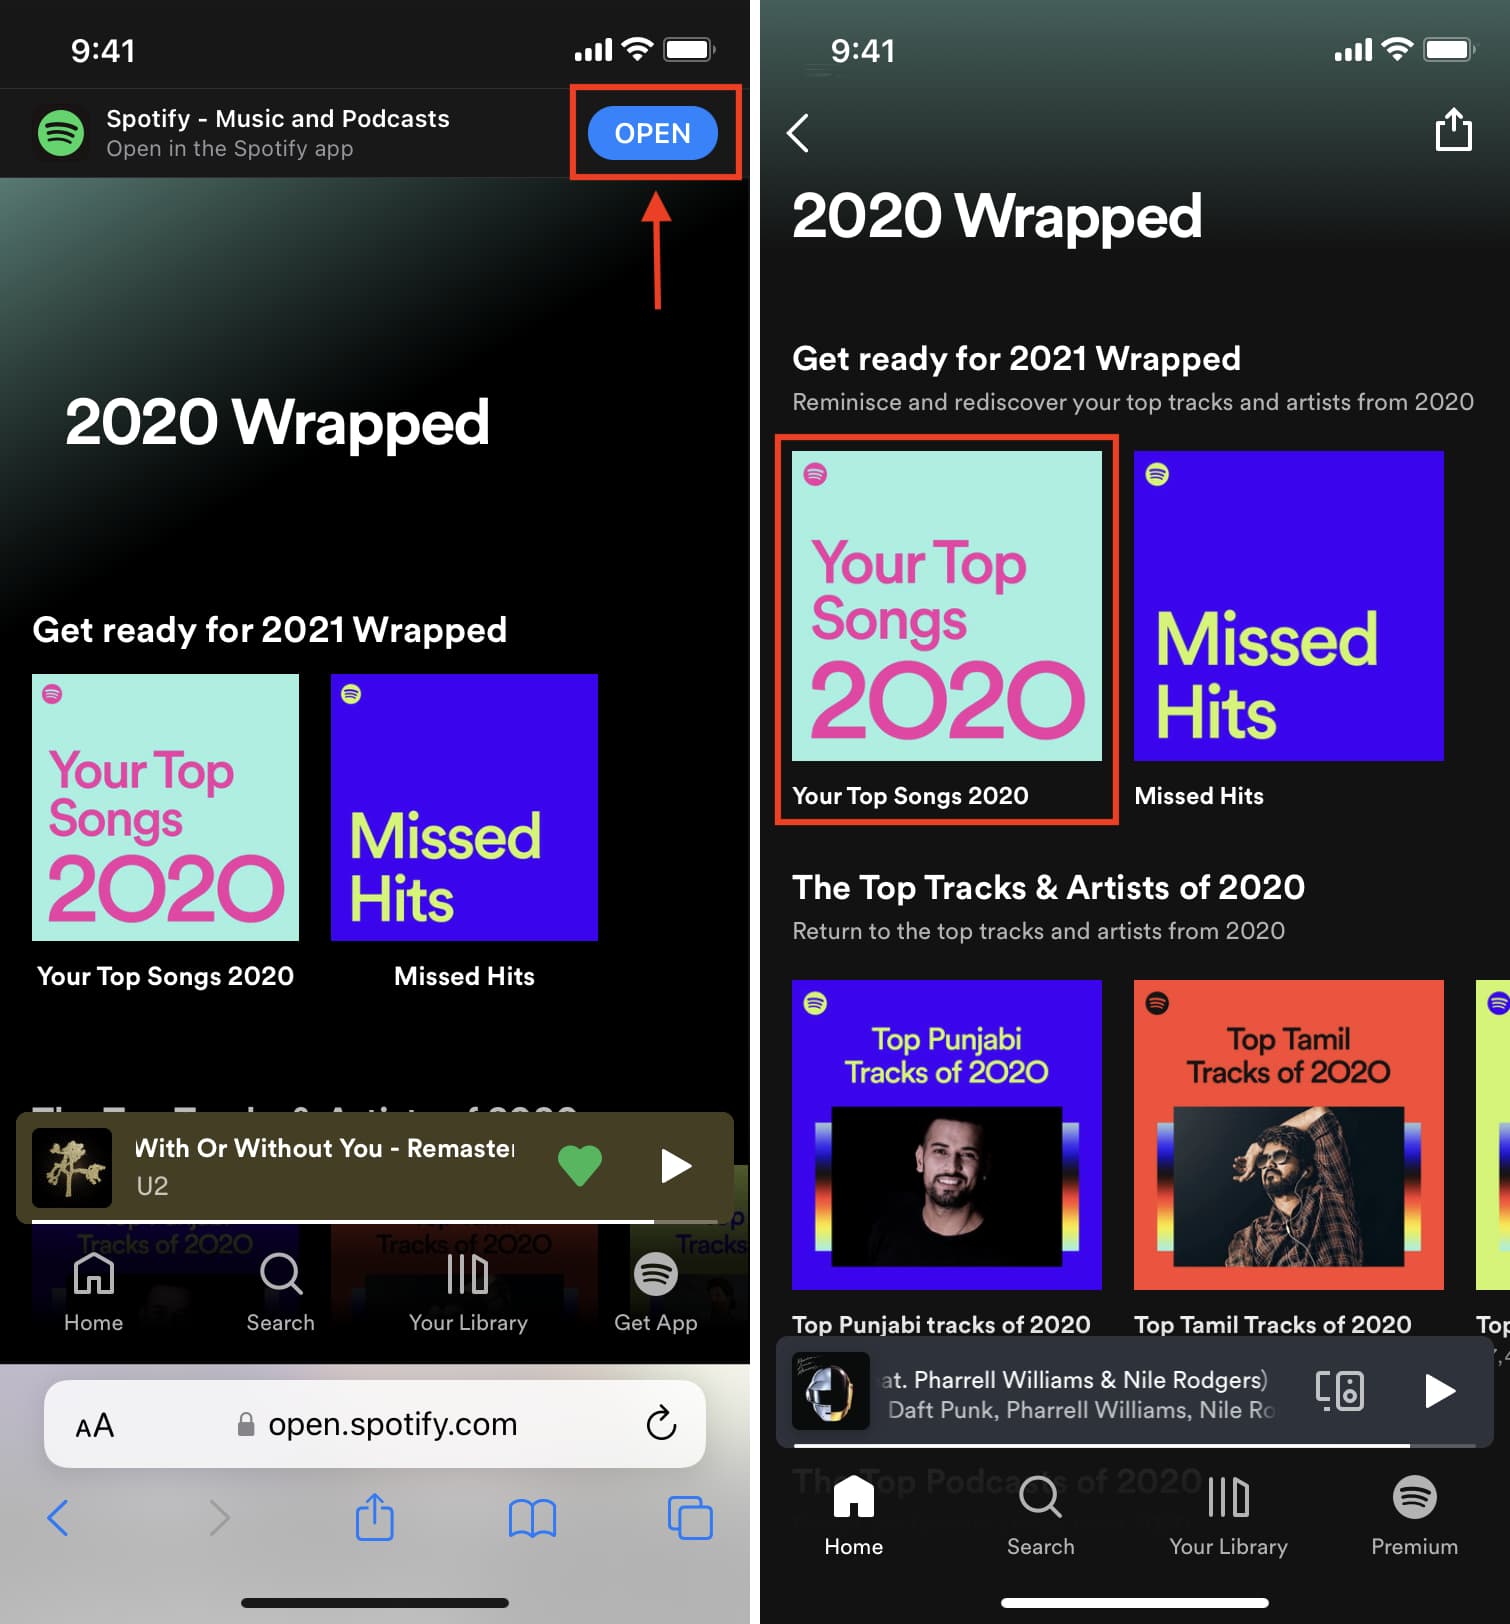 See your Spotify Wrapped from previous years and save those top songs